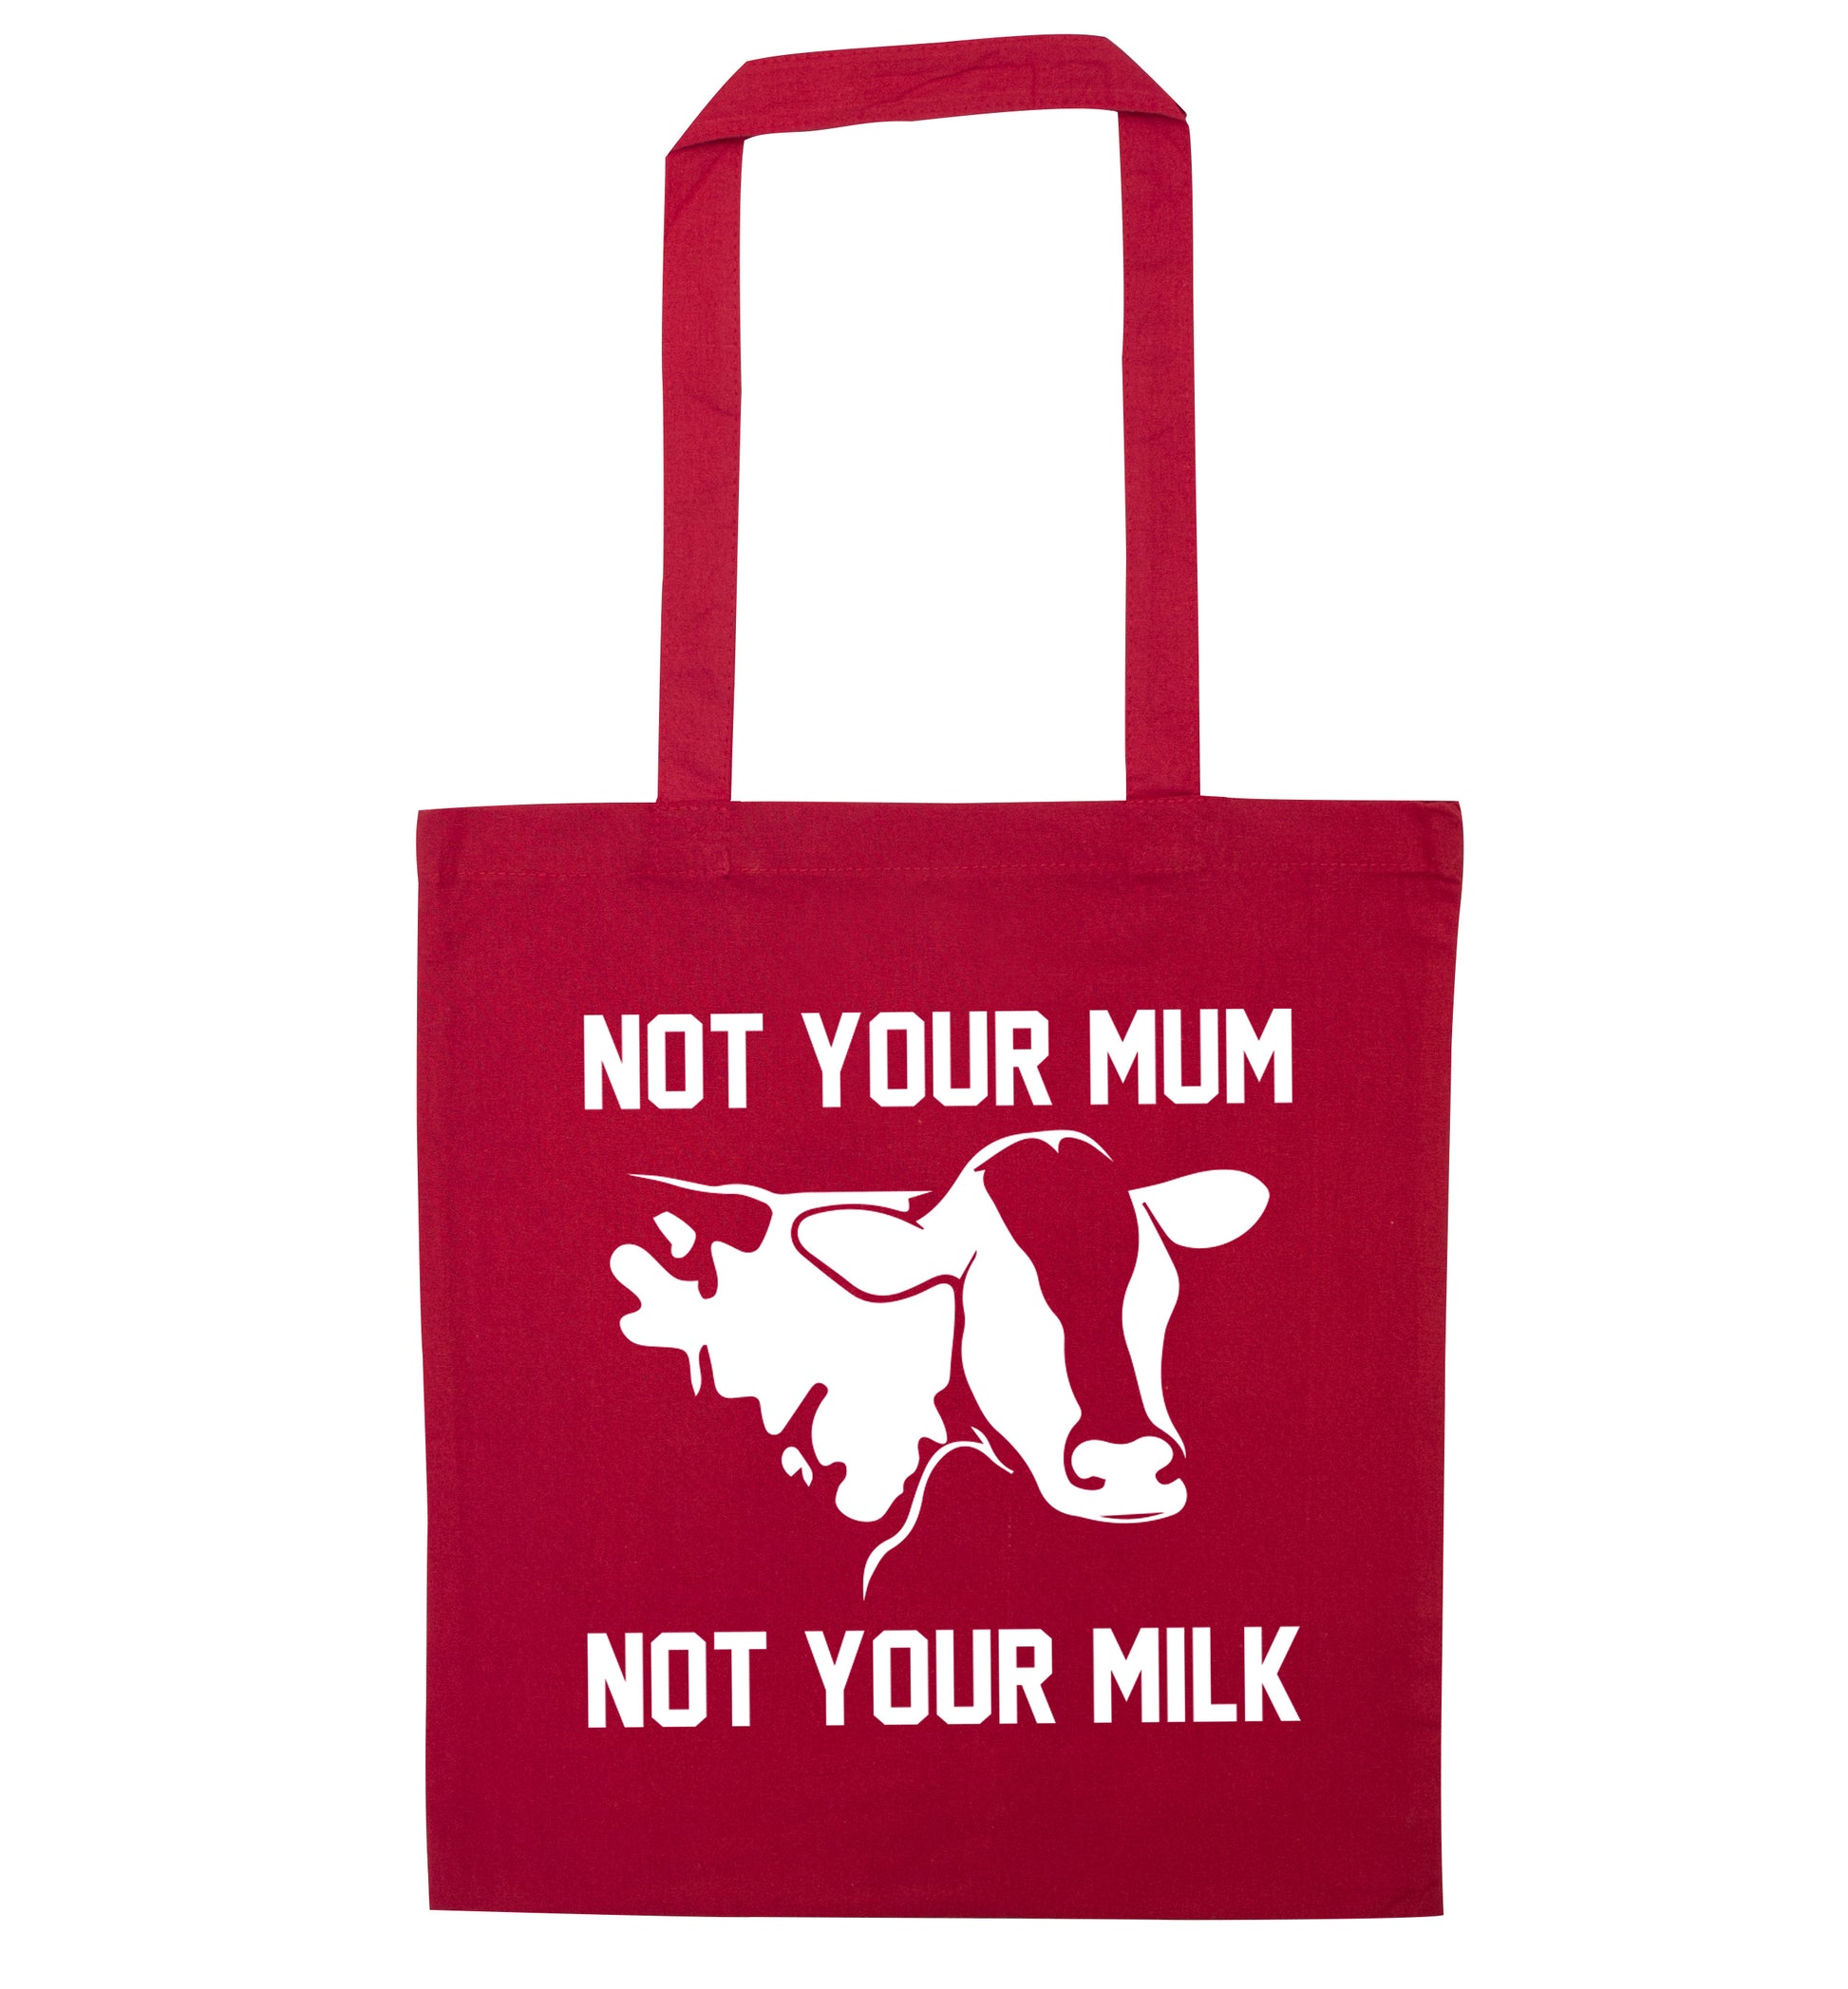 Not your mum not your milk red tote bag